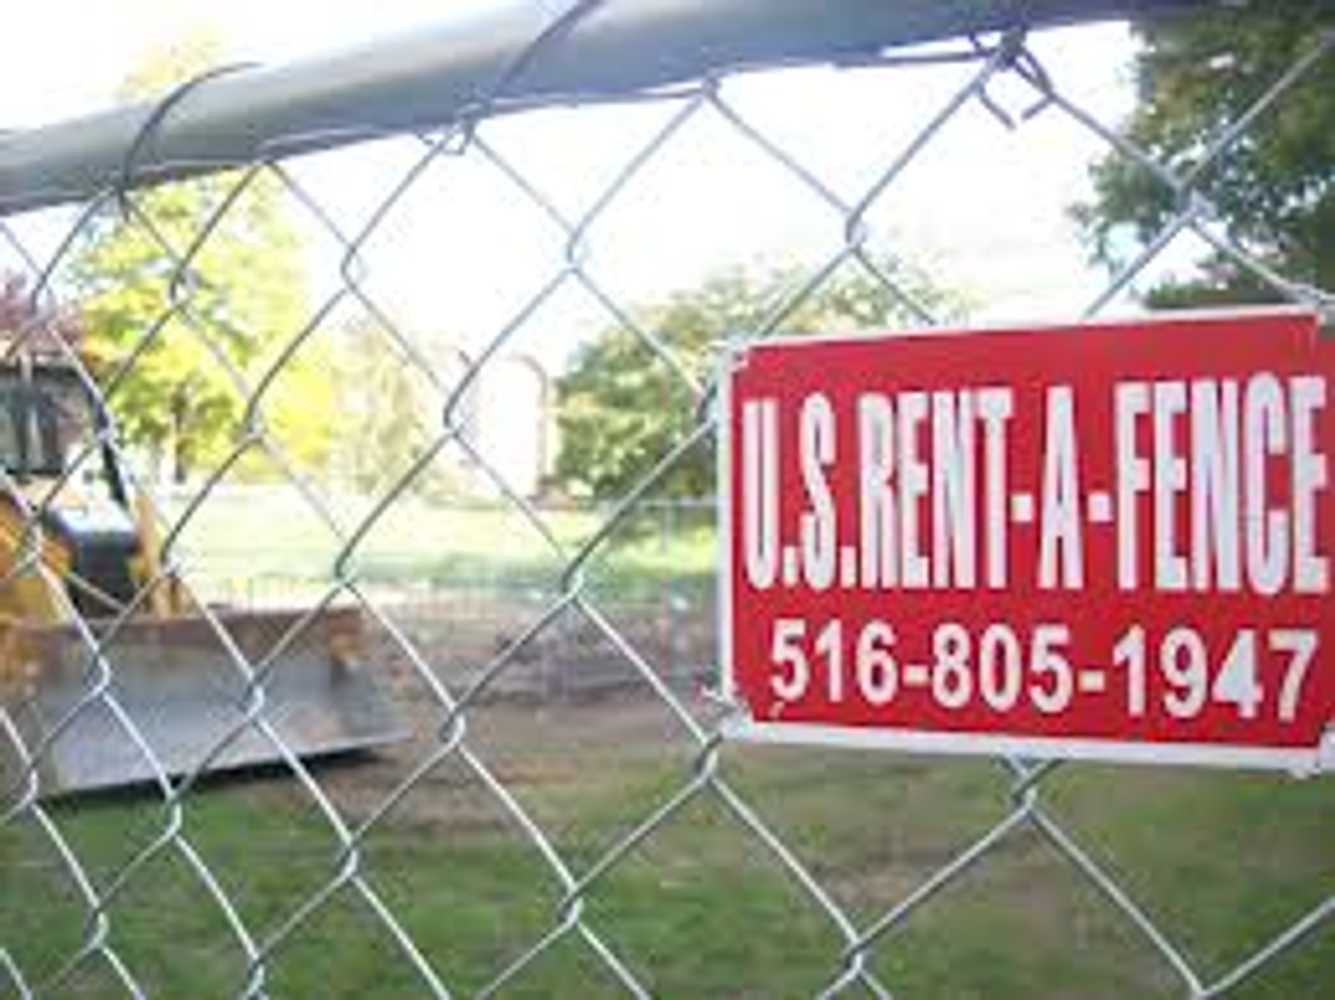 Photo(s) from U.S.RENT A FENCE